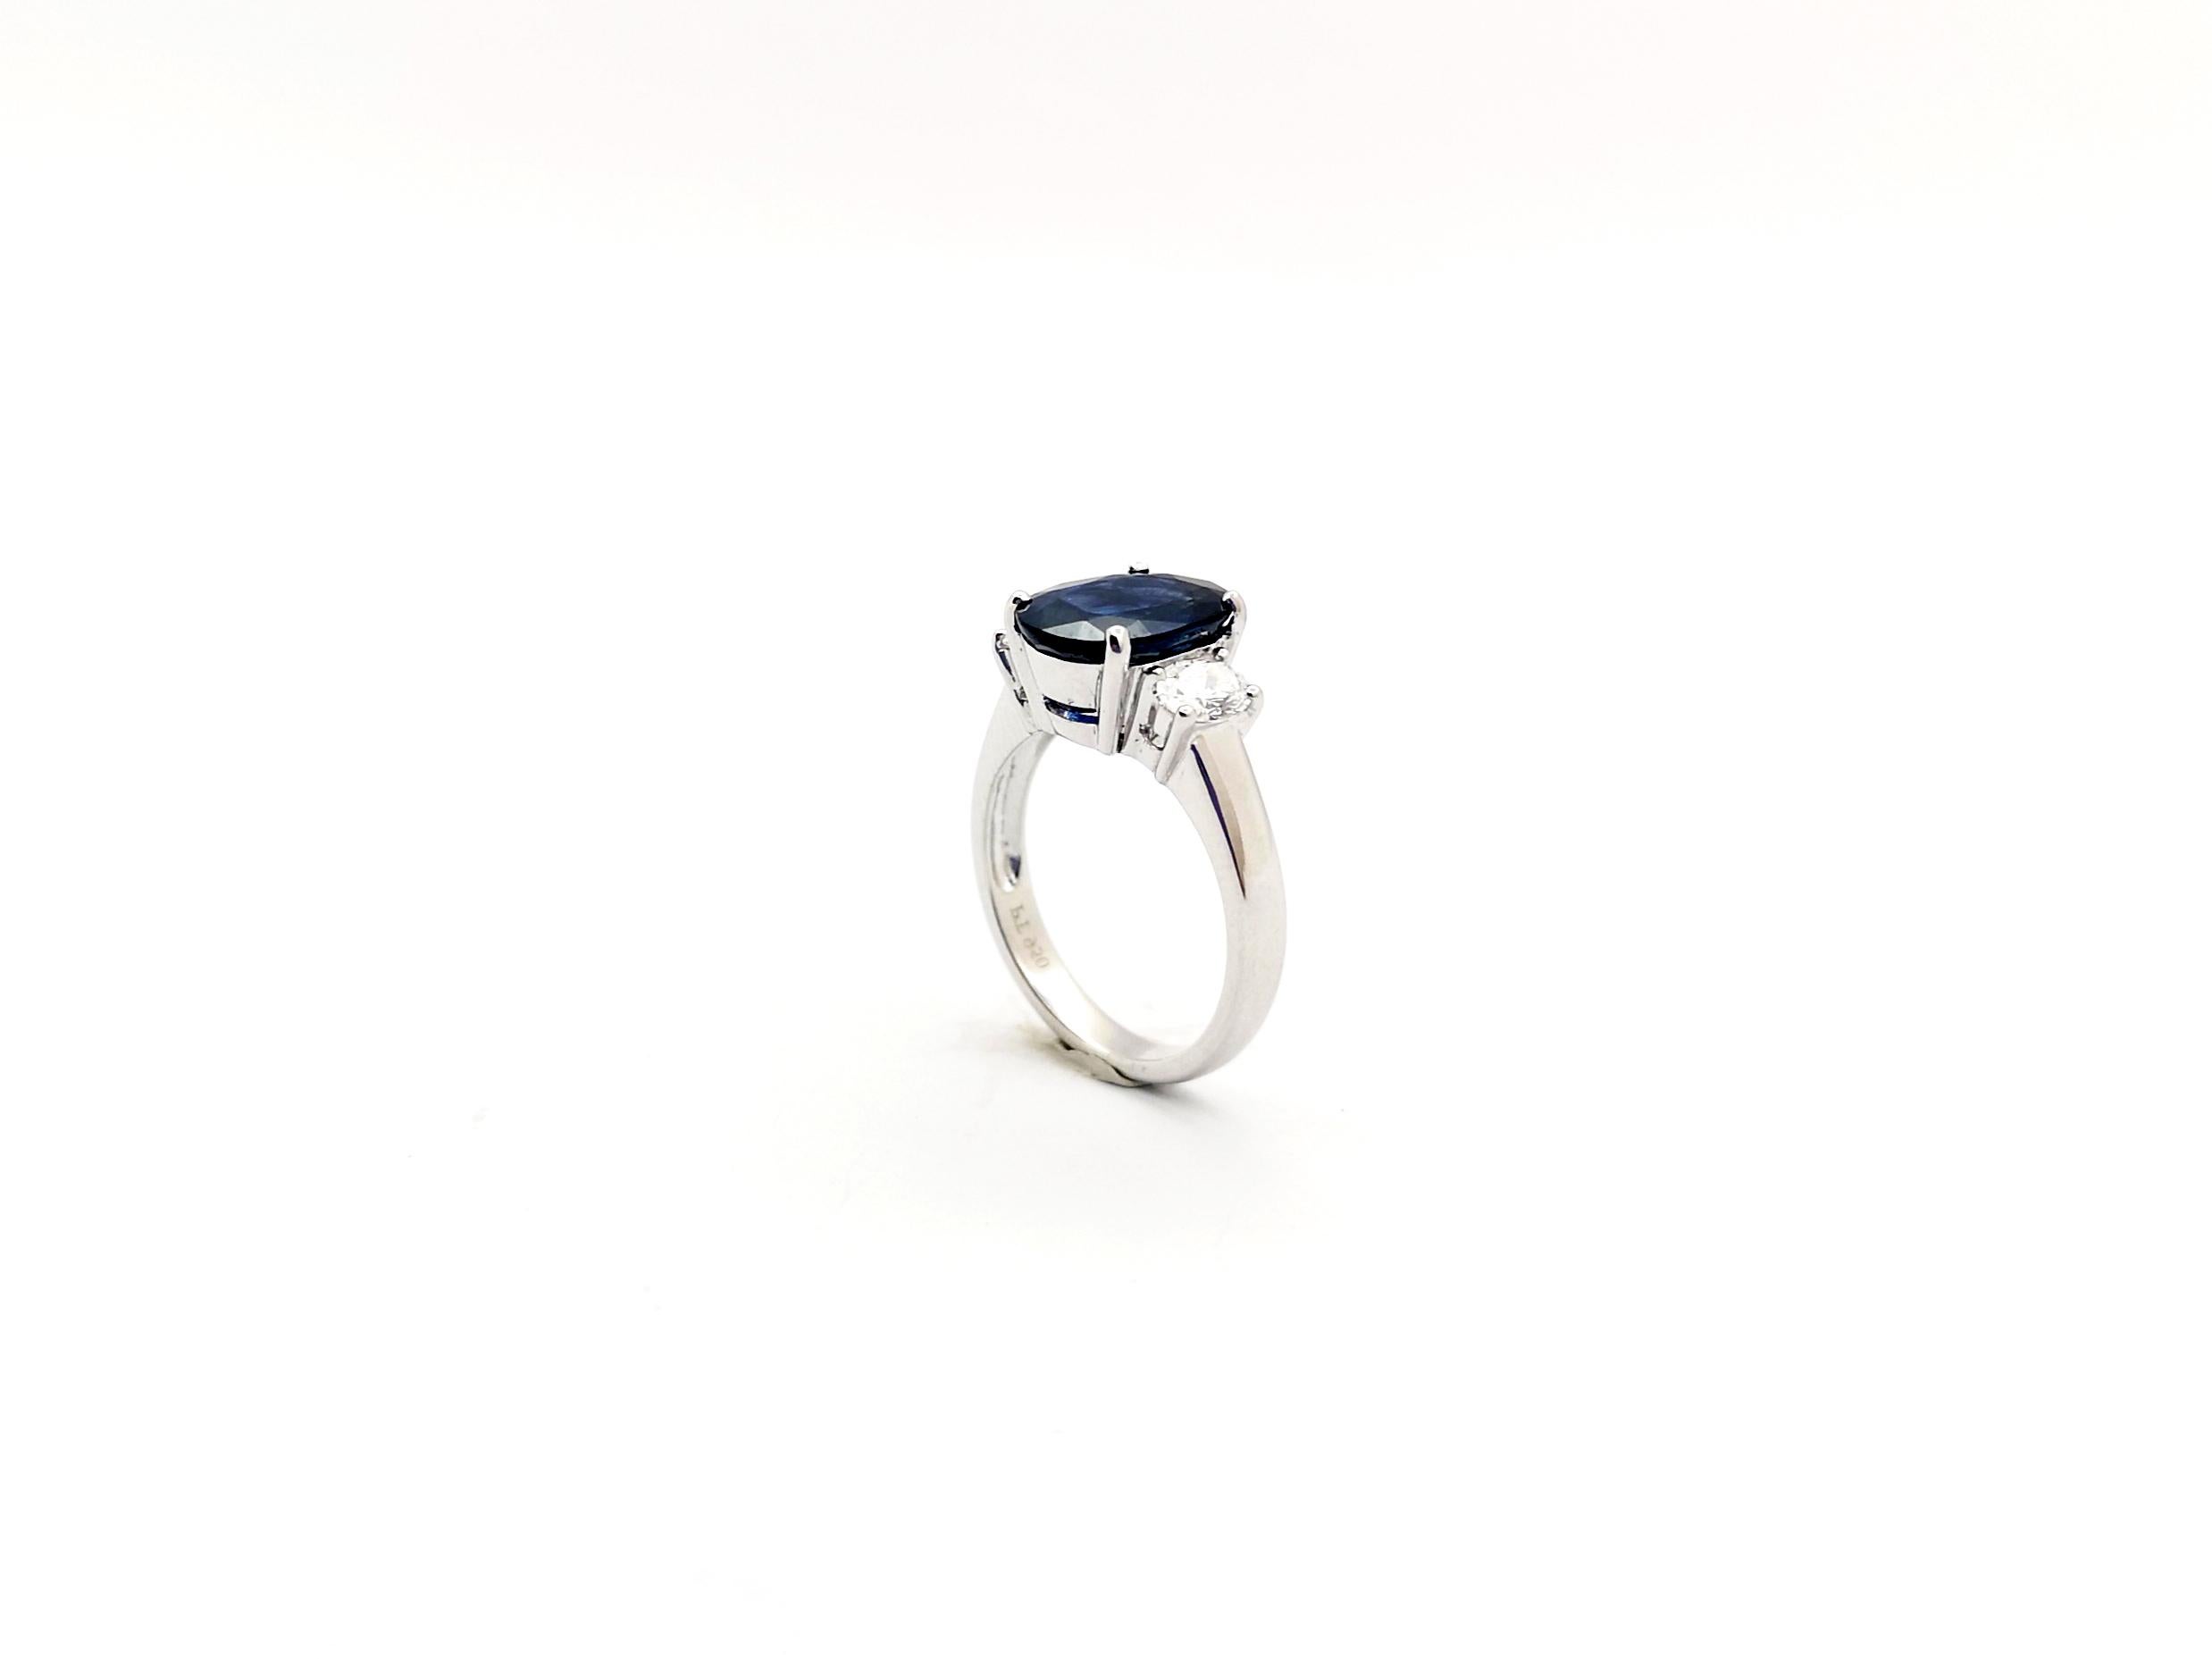 GIA Certified 3.89 cts Blue Sapphire with Diamond Ring set in Platinum 950  For Sale 10